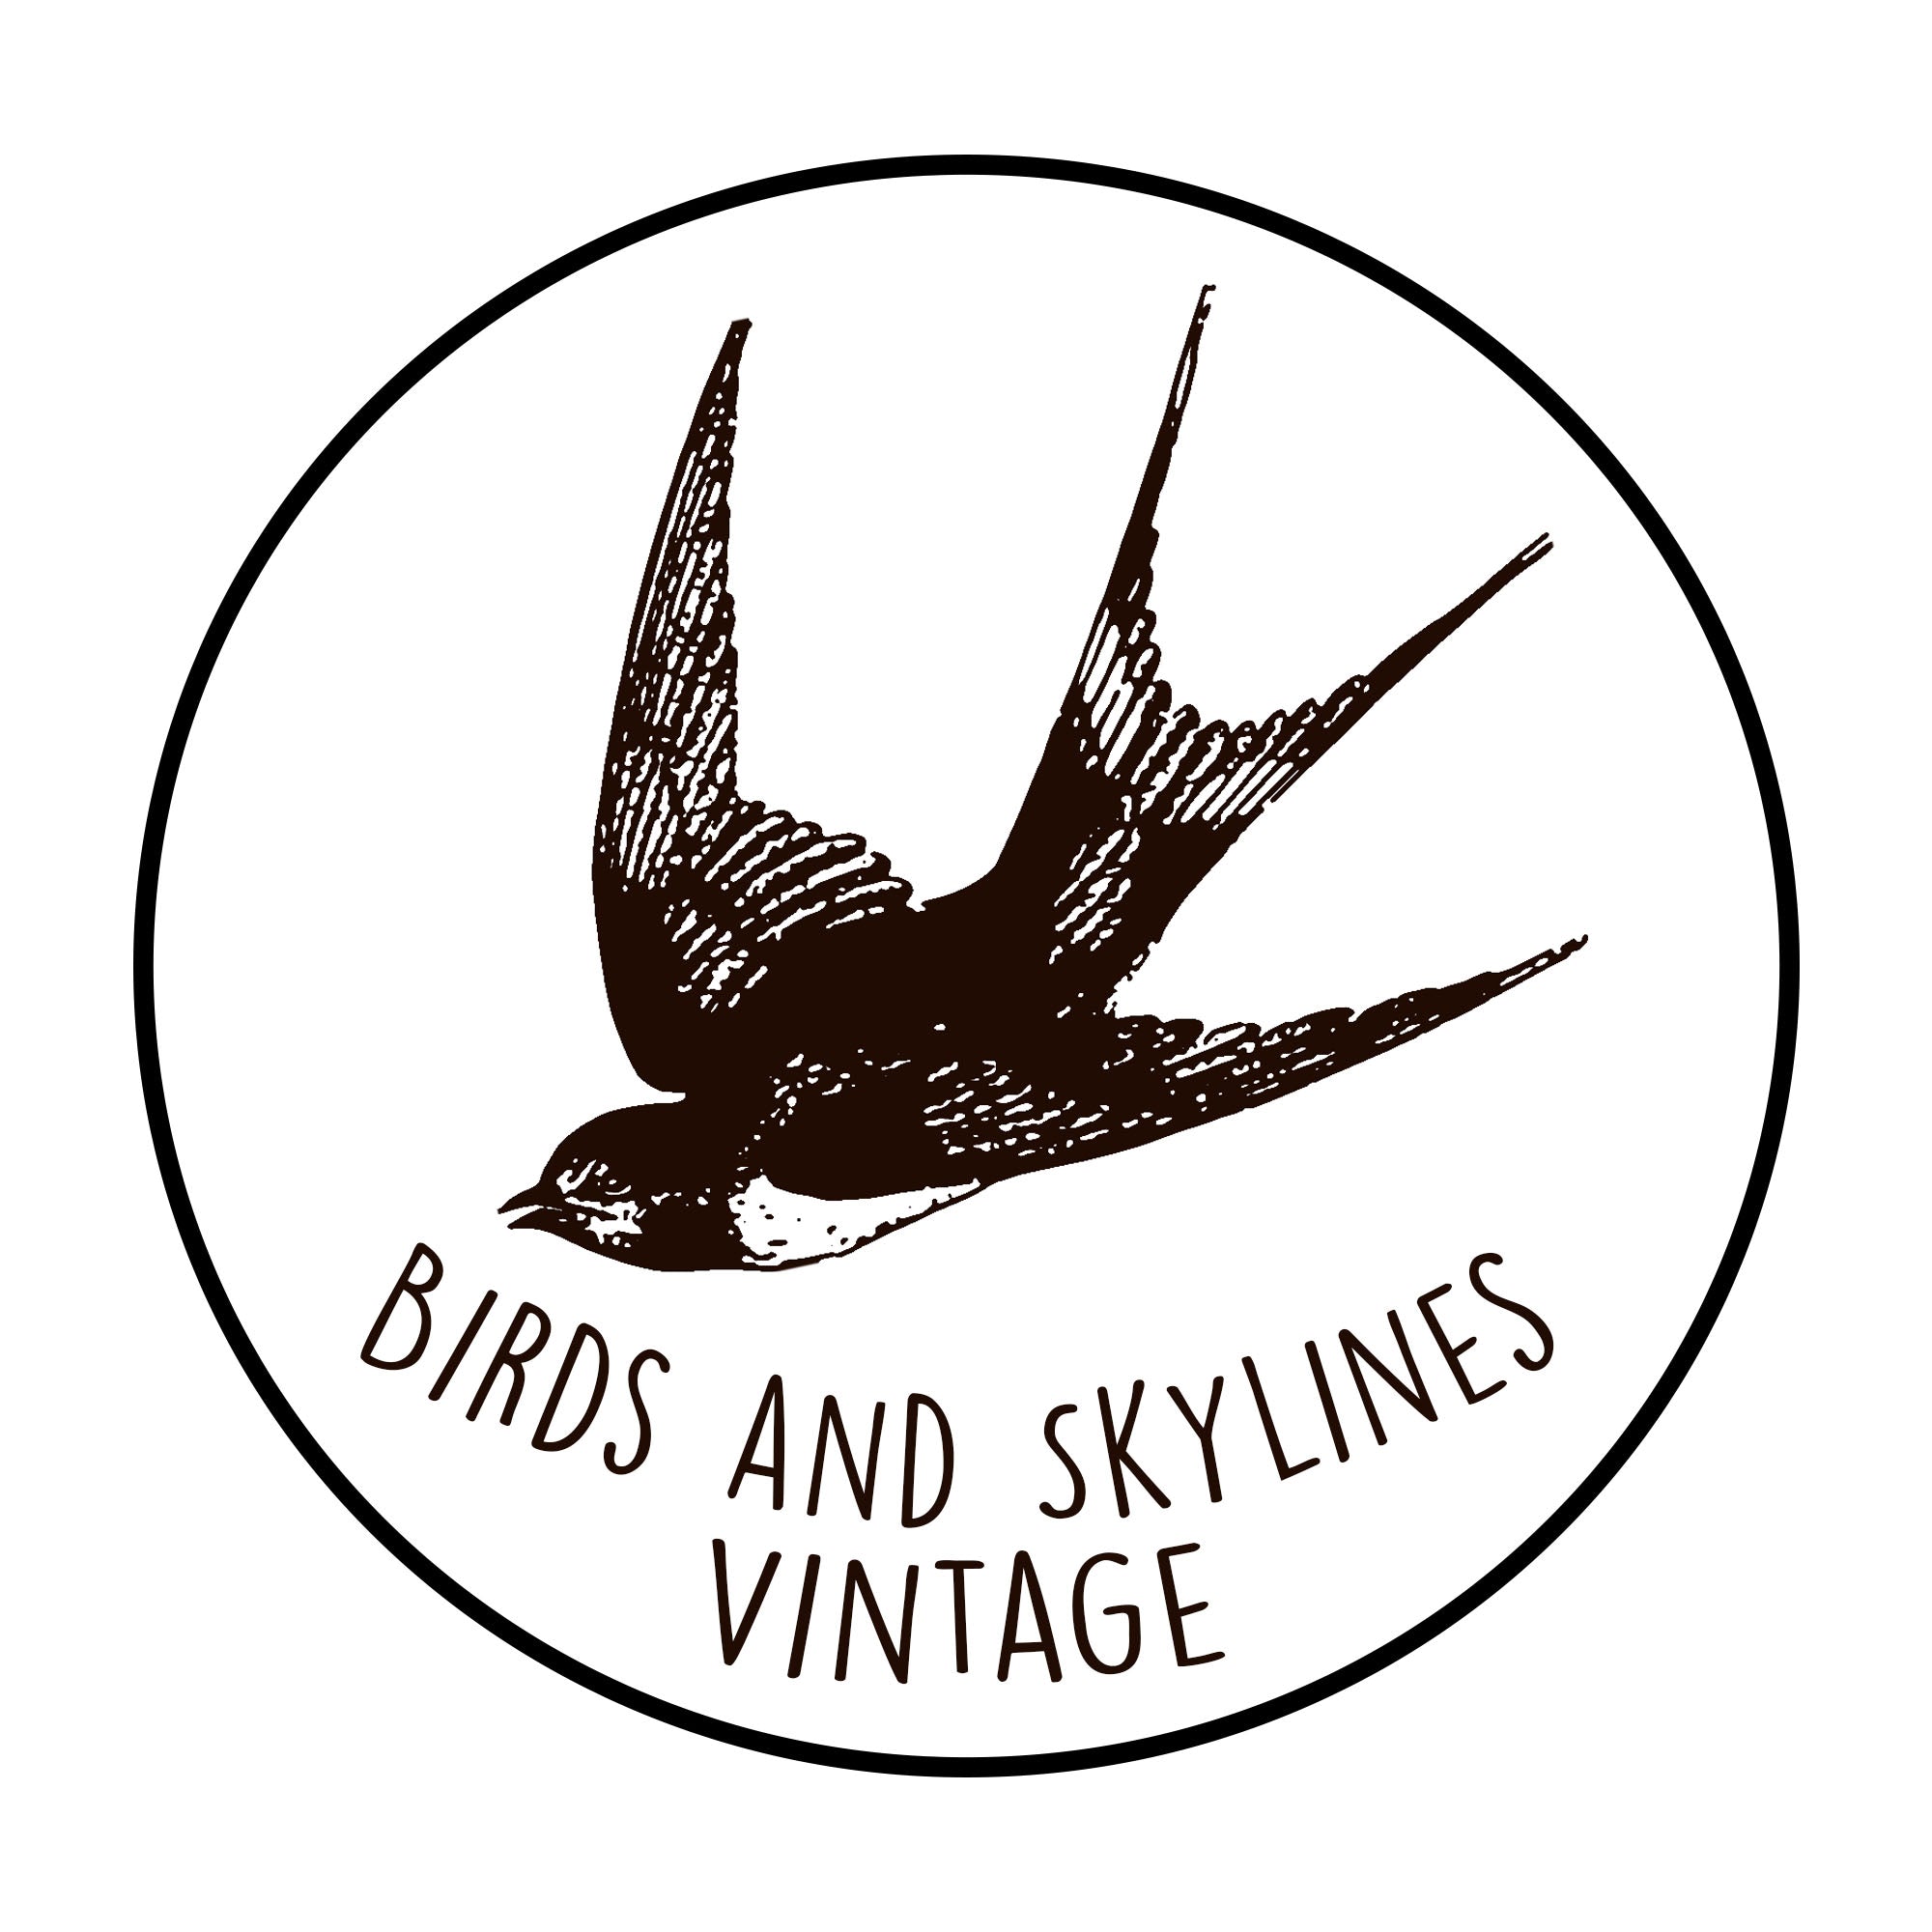 Birds and Skylines Vintage